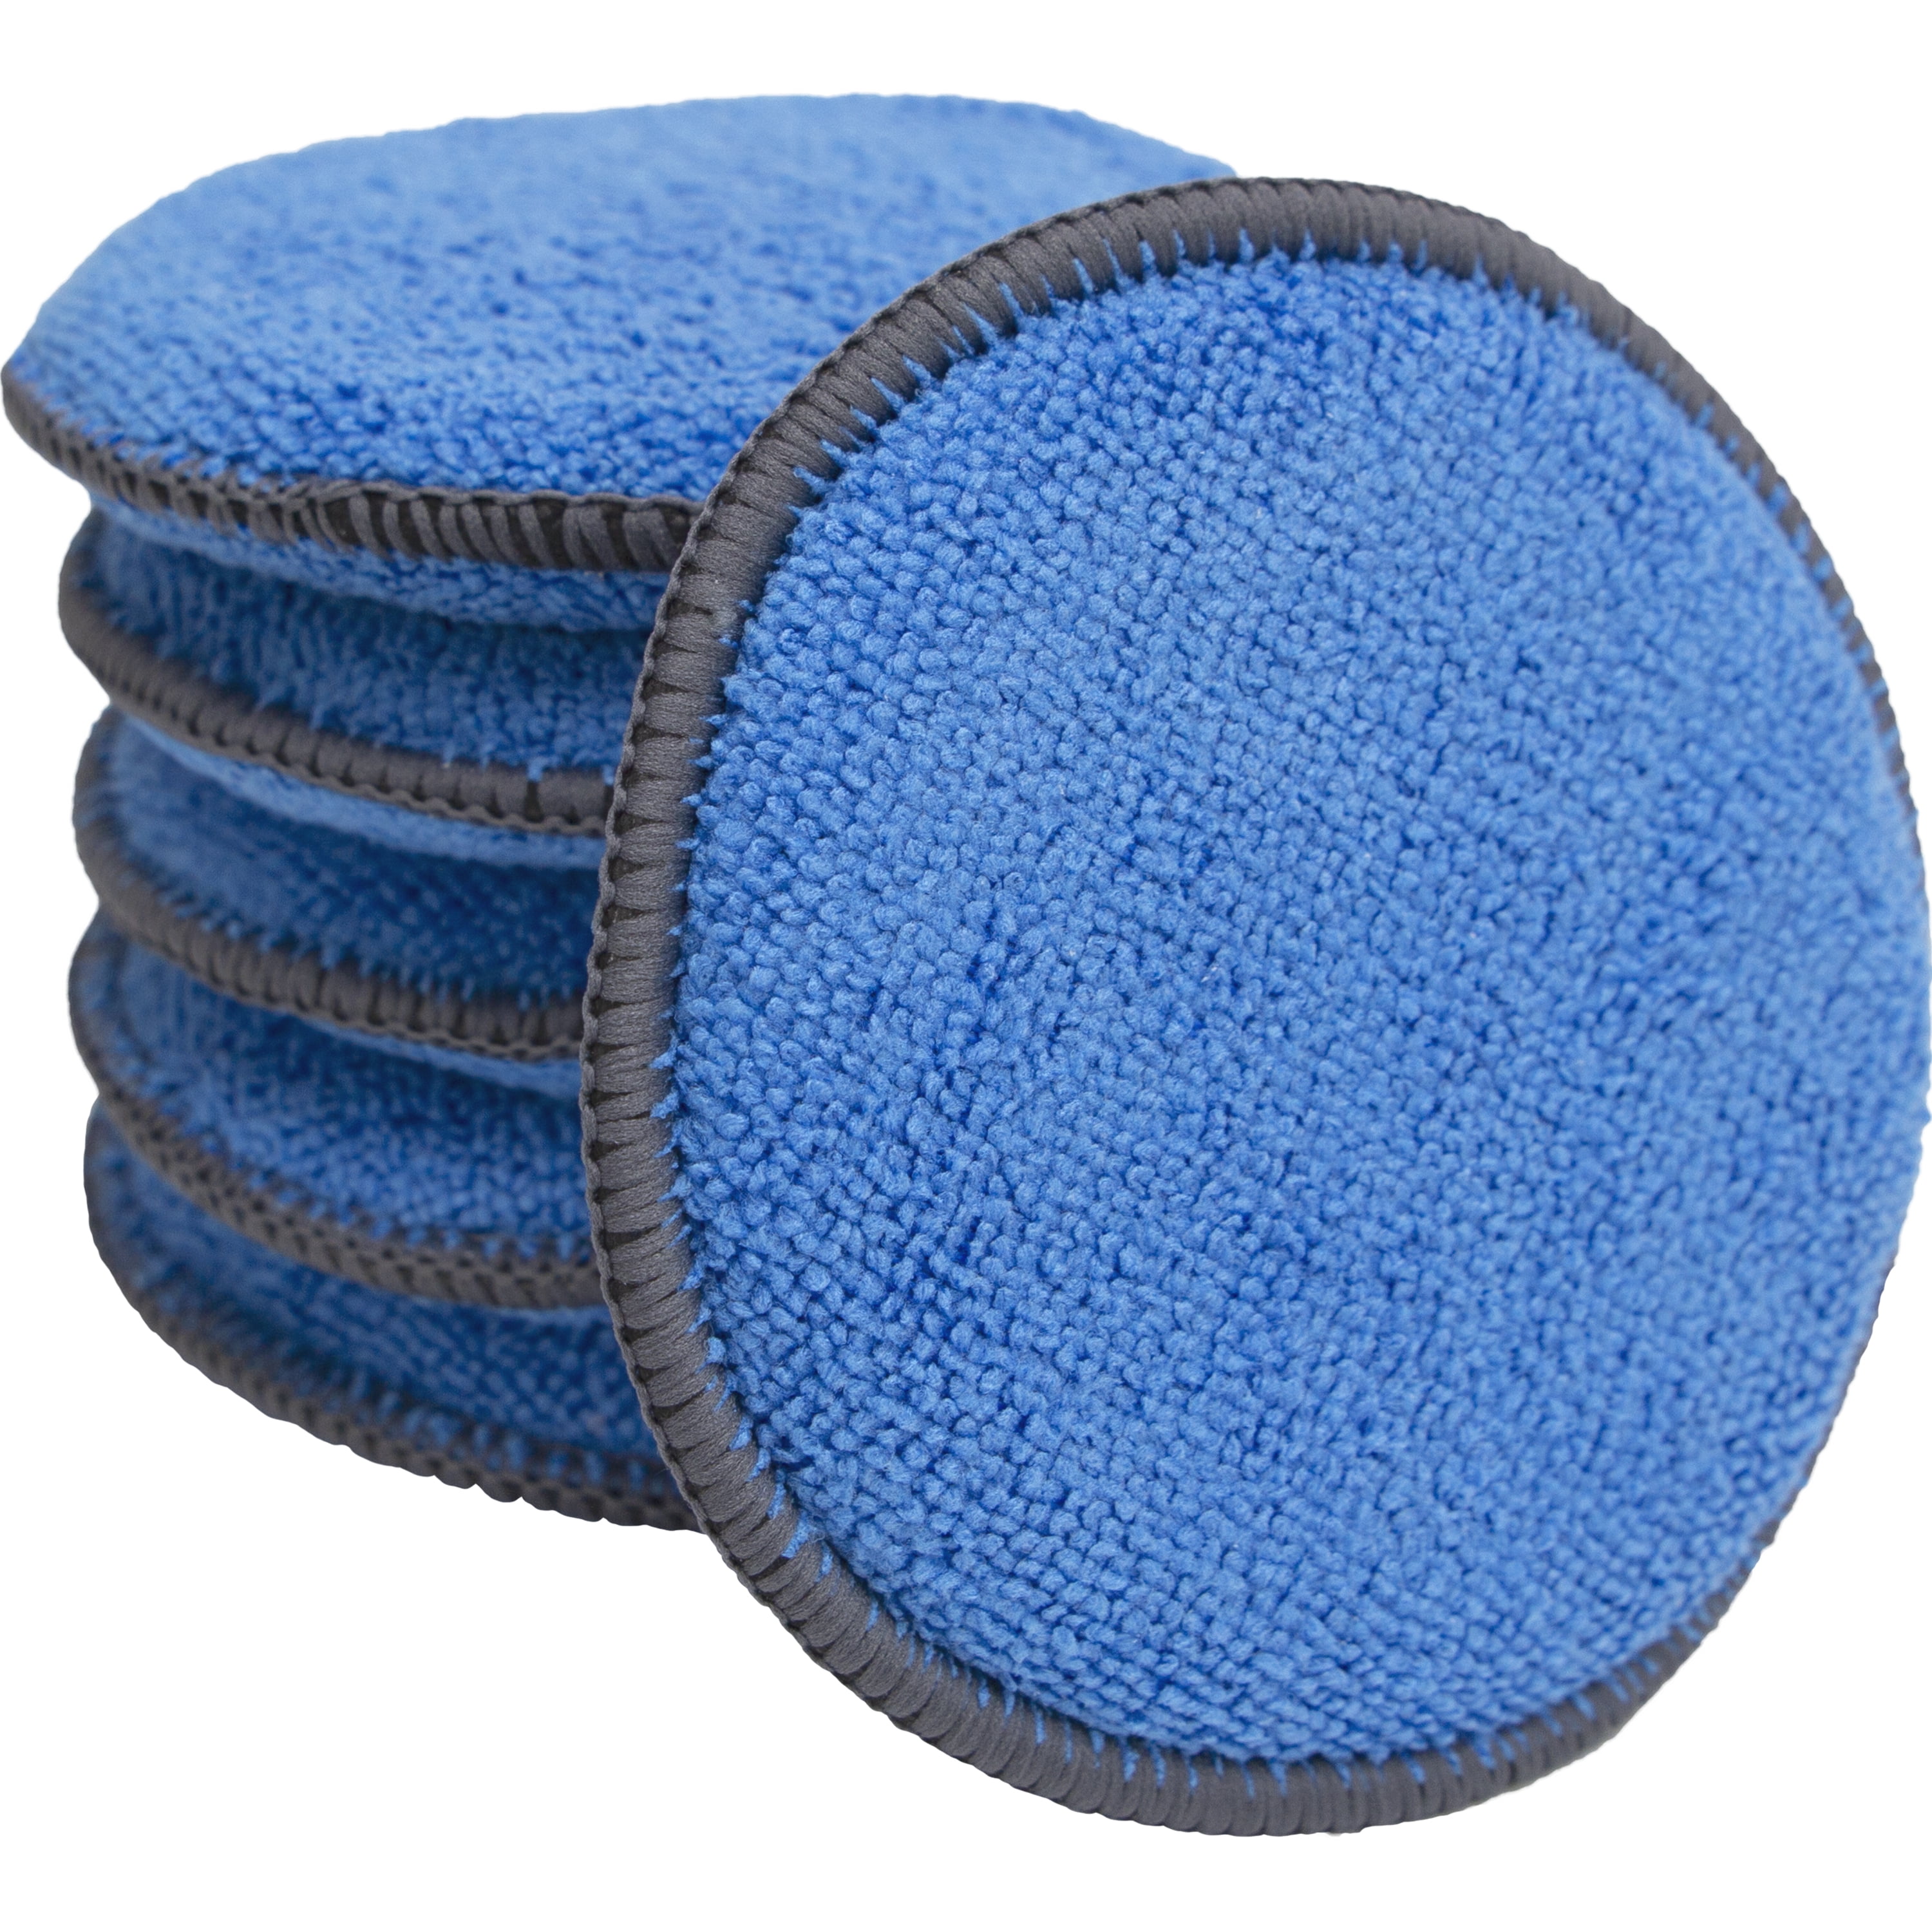 6 Pack VIKING Microfiber Applicator and Cleaning Pads Blue/Grey 5 Inch Diameter 